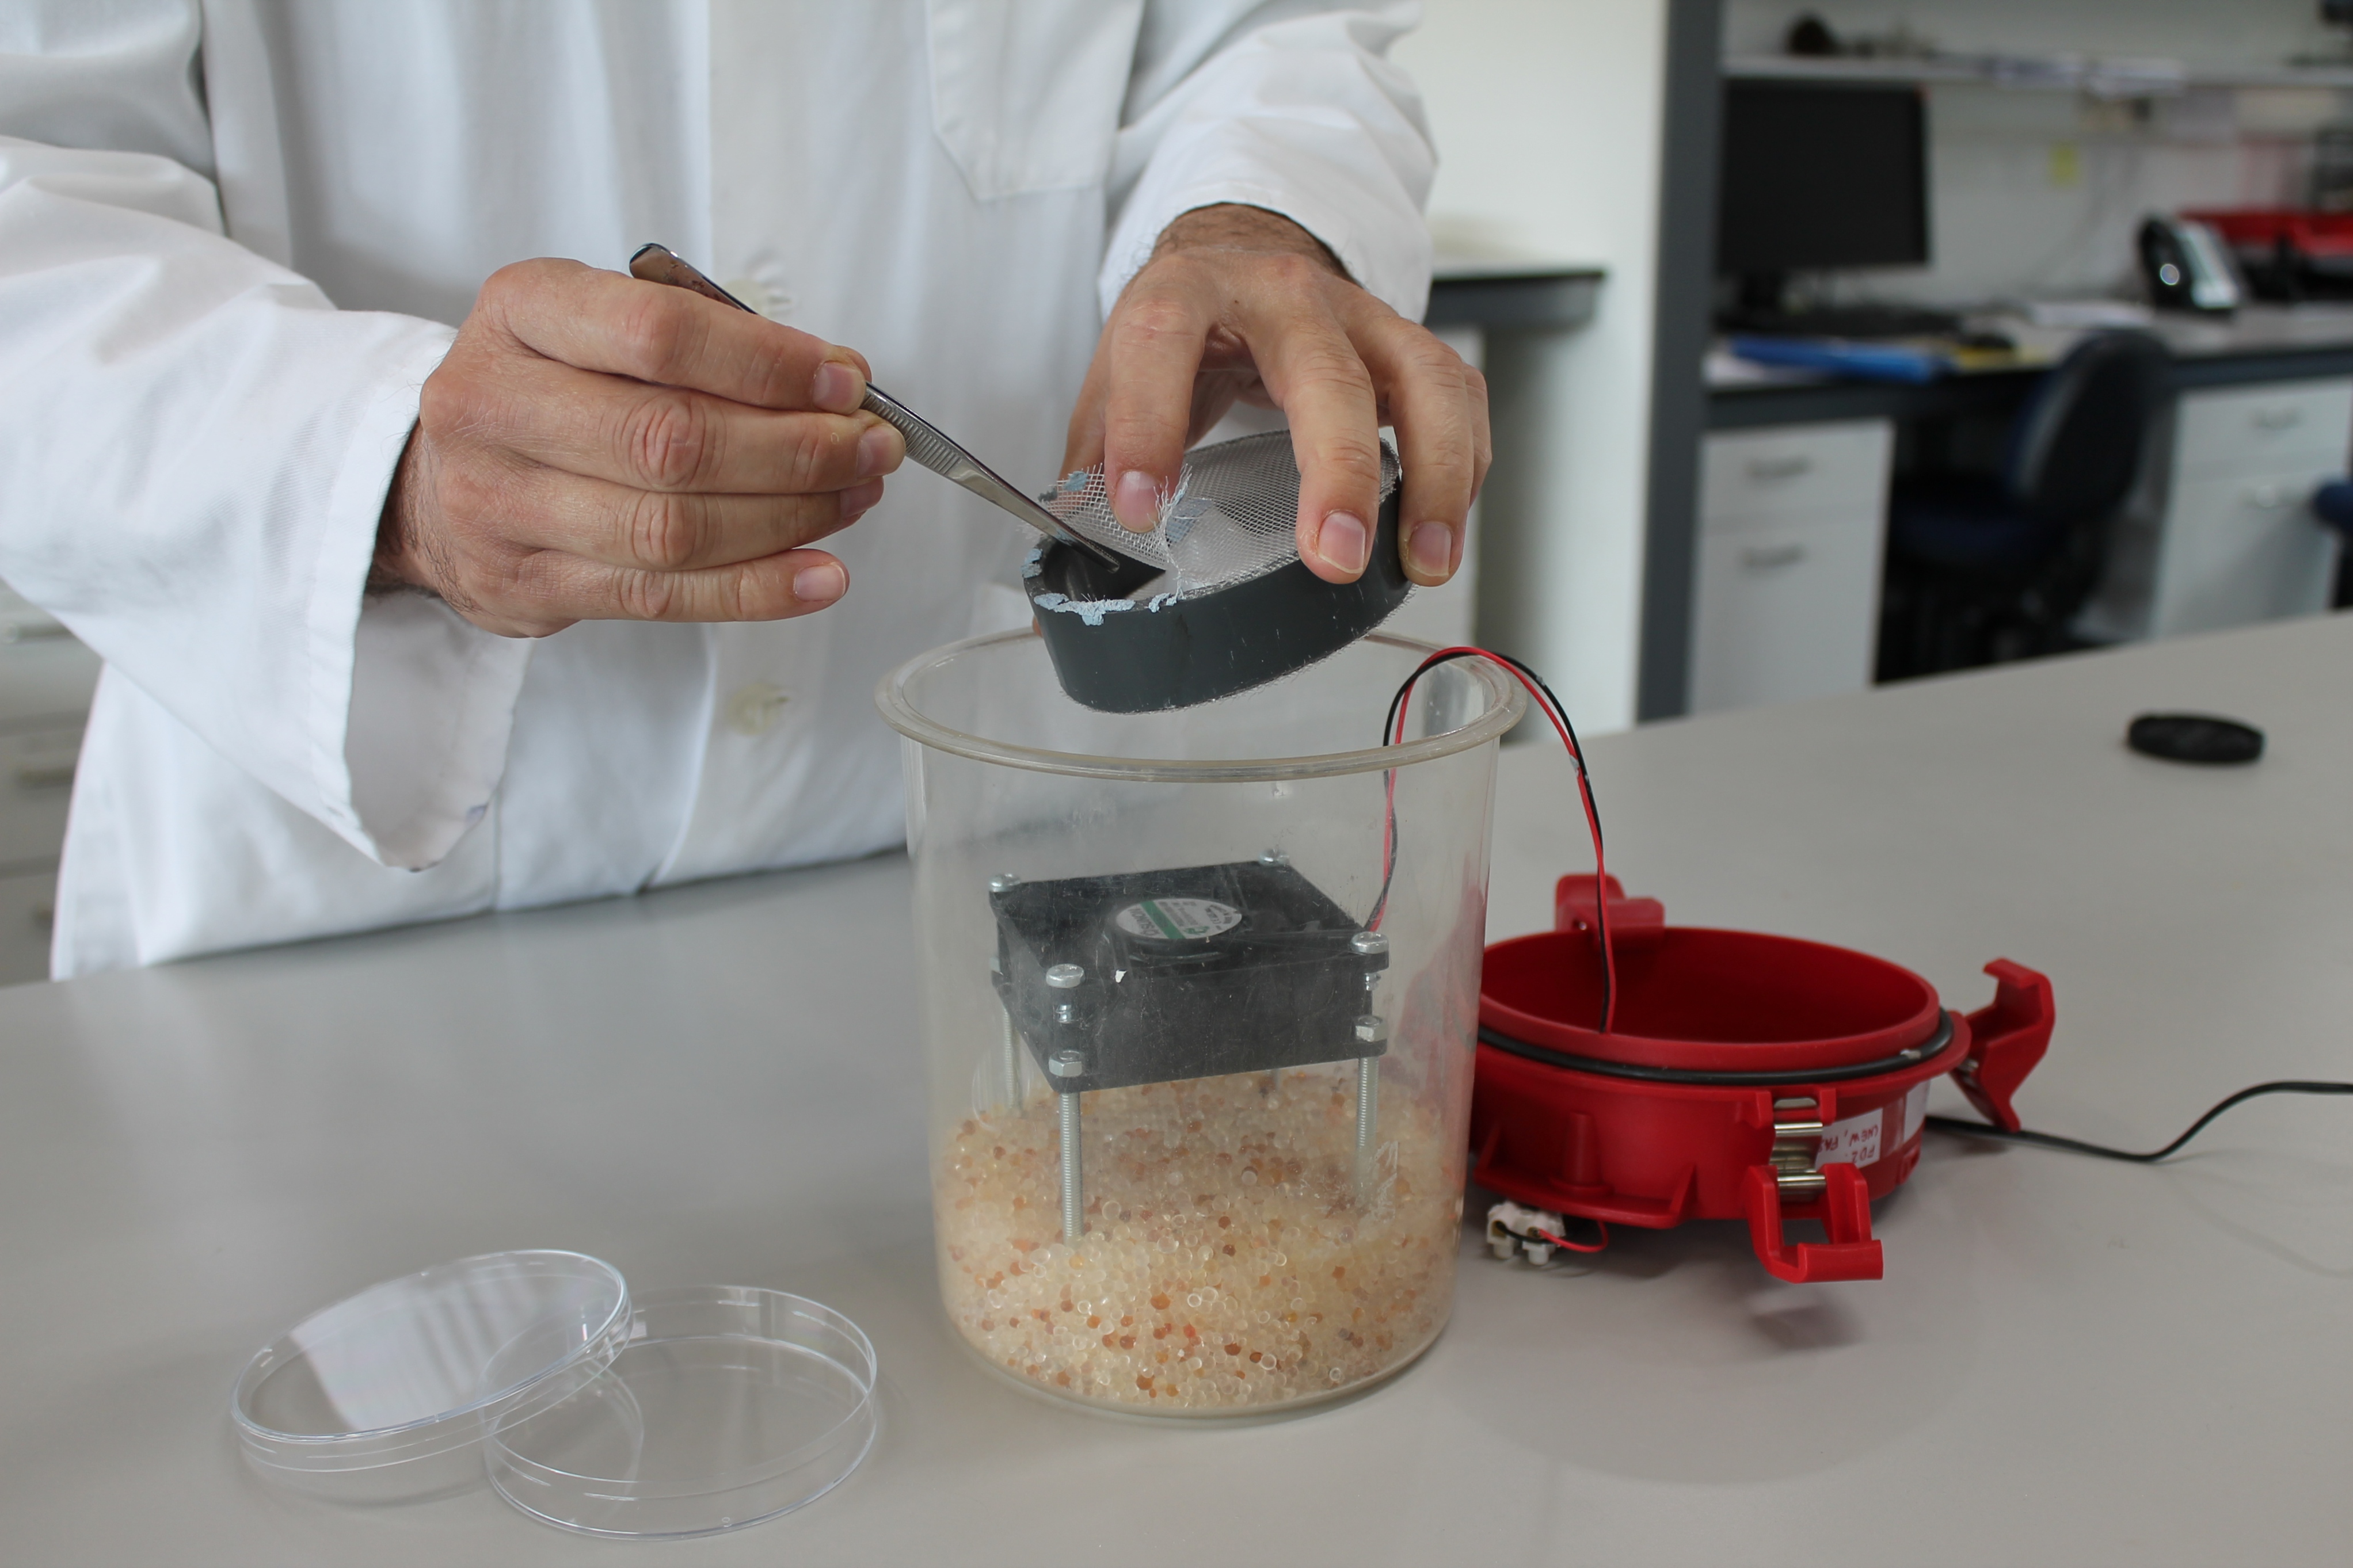 A scientists partially dries a seed